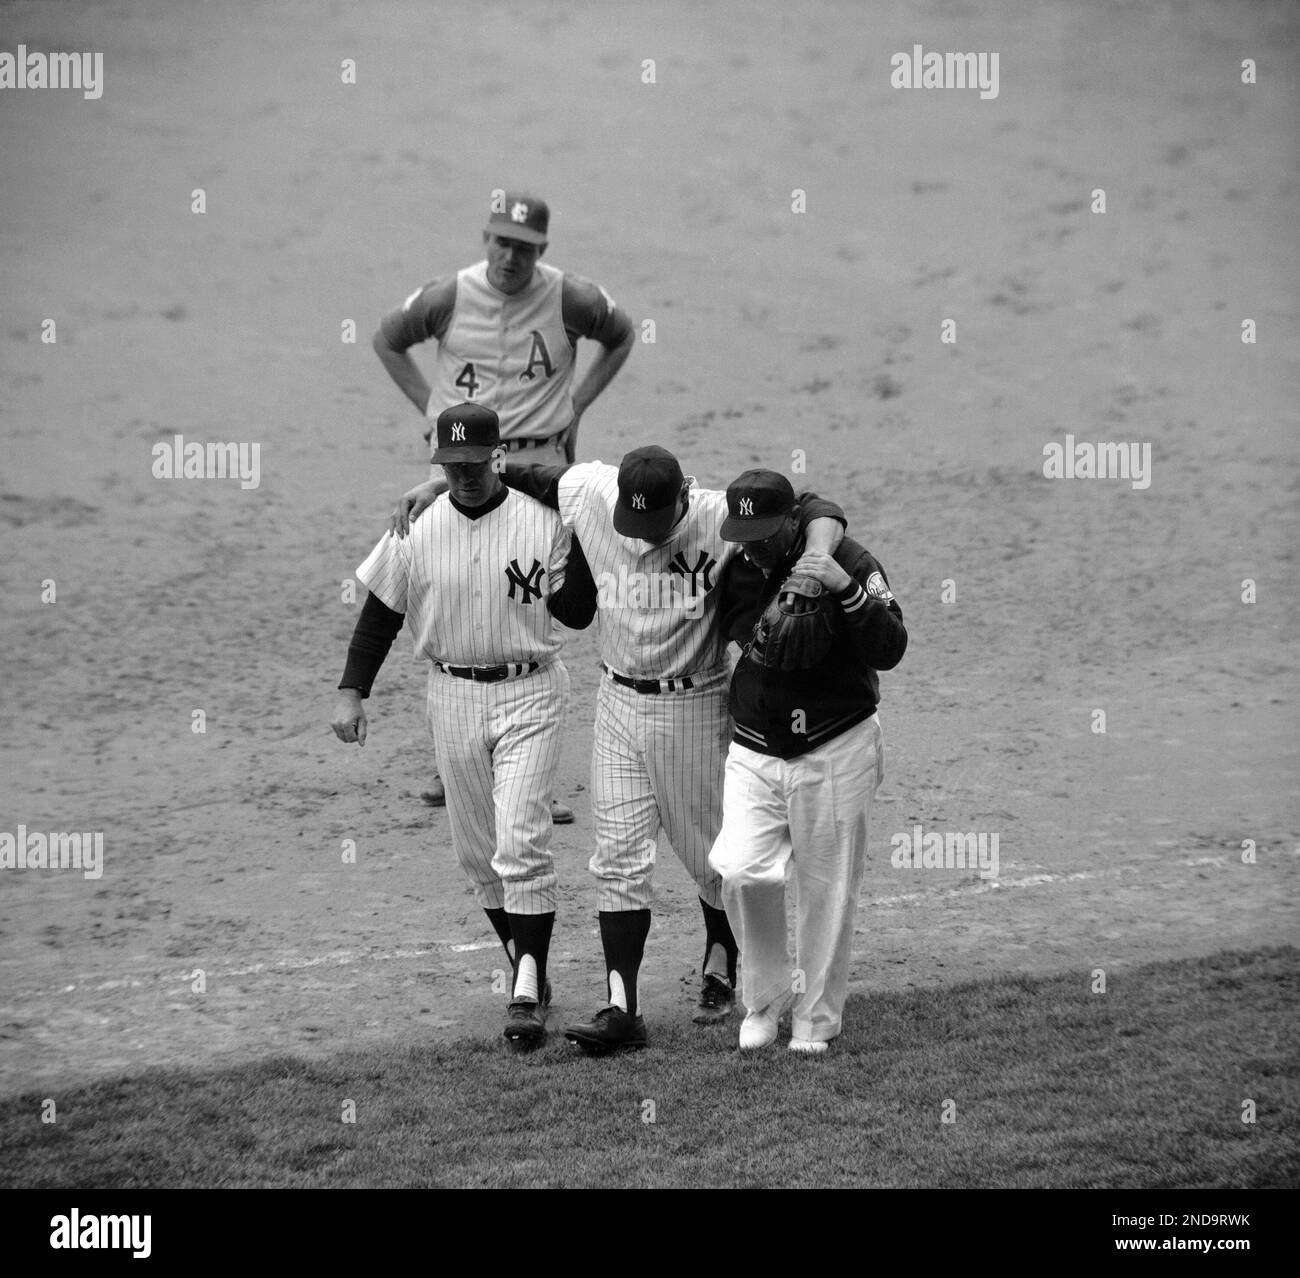 https://c8.alamy.com/comp/2ND9RWK/yankee-coach-vern-benson-left-and-trainer-joe-soares-right-help-outfielder-roger-maris-off-the-field-at-new-yorks-yankee-stadium-on-april-28-1965-the-slugger-injured-his-right-leg-while-making-tough-catch-against-kansas-city-athletics-during-which-he-fell-heavily-maris-may-be-sidelined-as-long-as-three-weeks-the-injury-was-to-the-hamstring-muscle-of-the-right-thigh-ap-photo-2ND9RWK.jpg